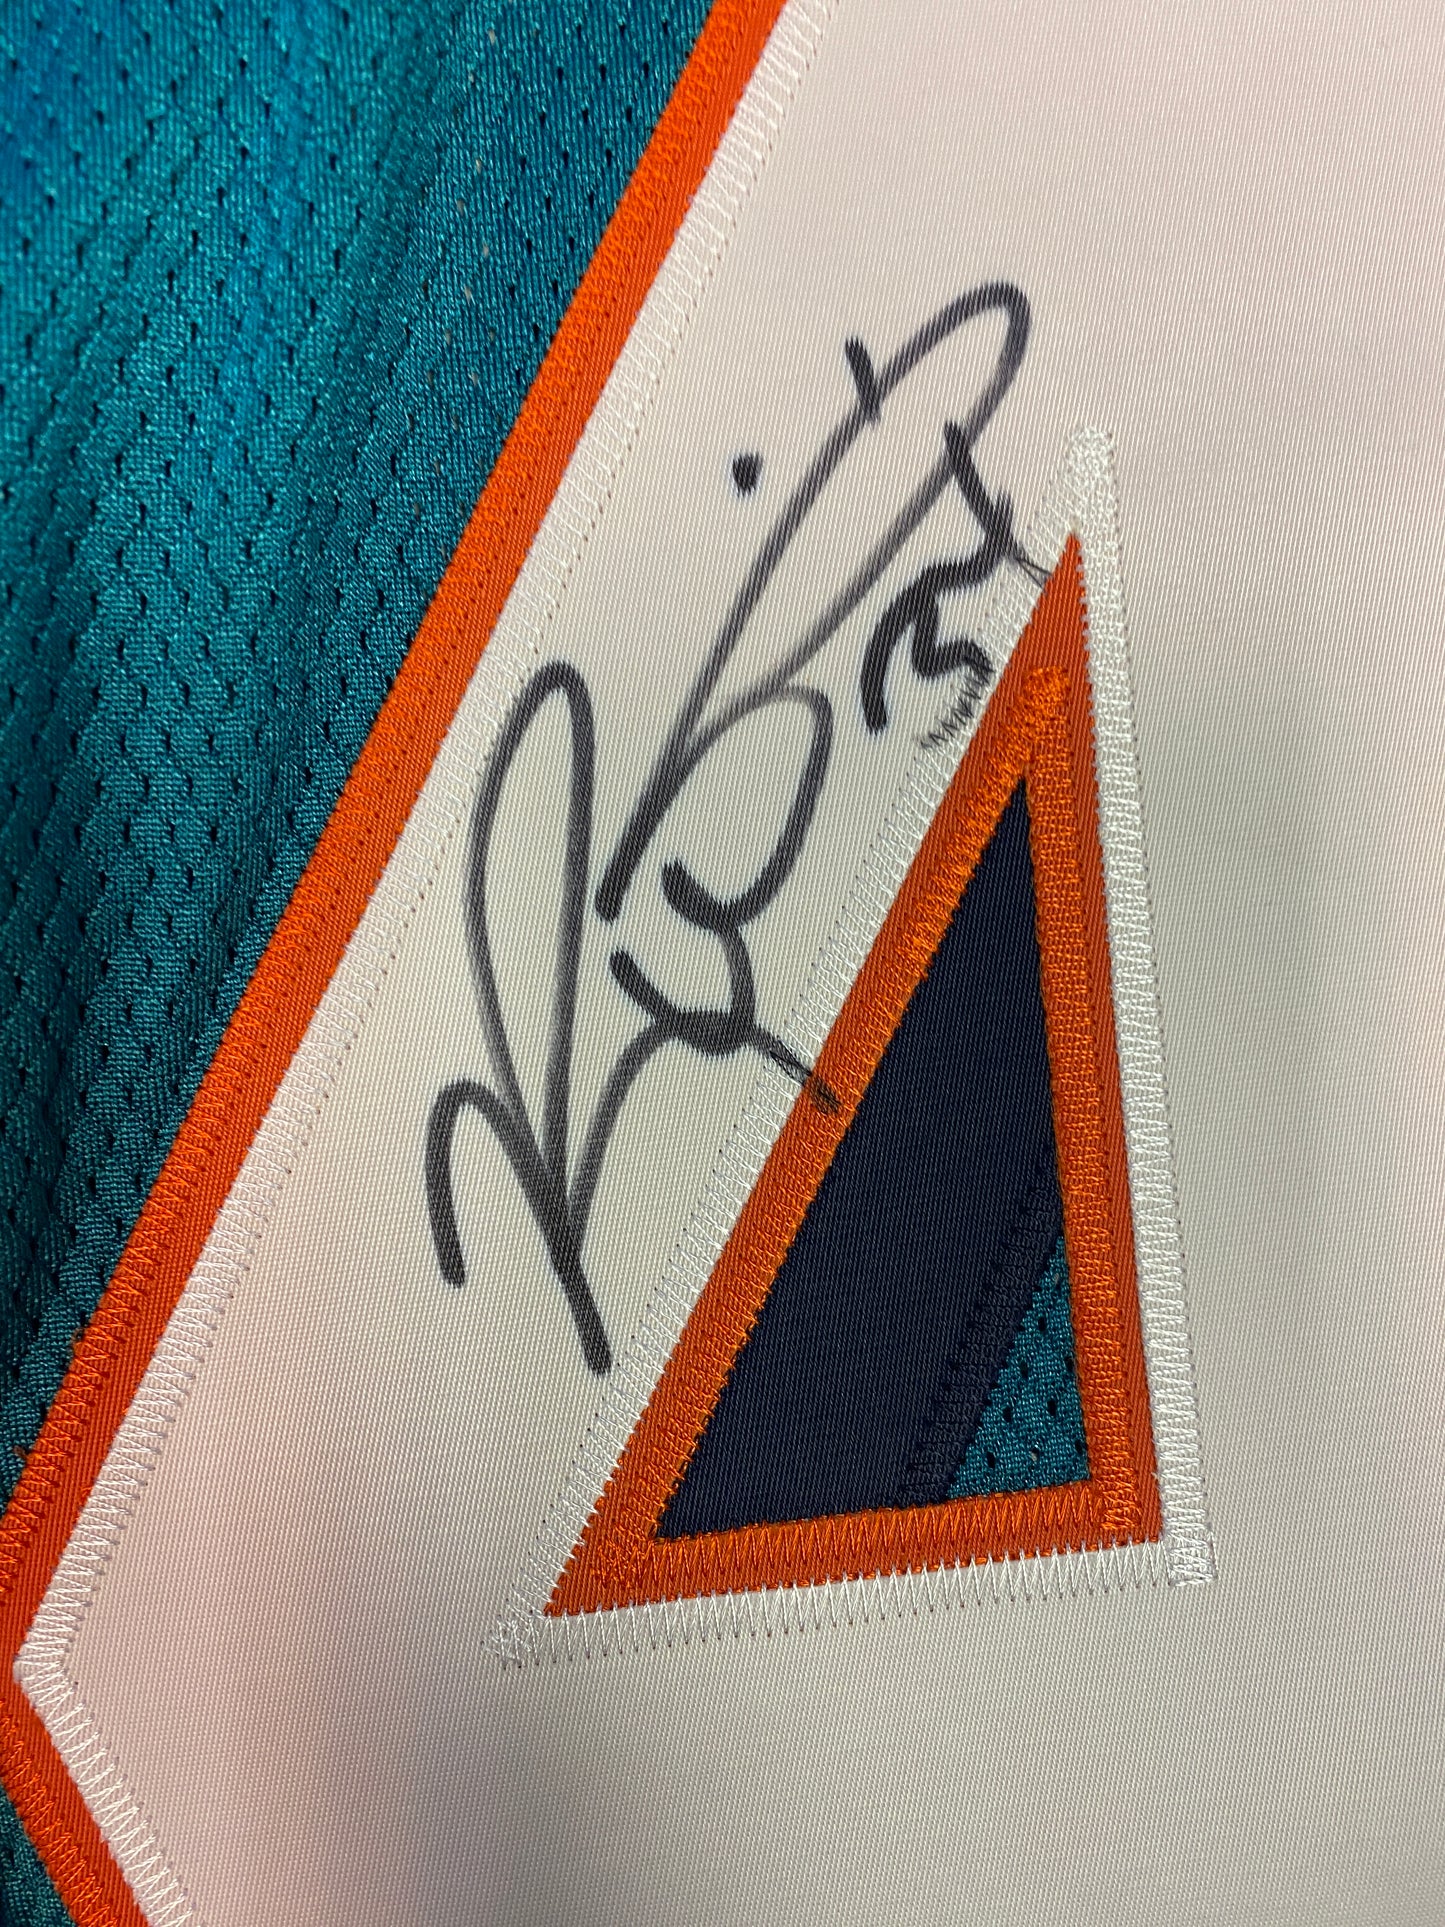 Ricky Williams Signed Miami Dolphins Jersey